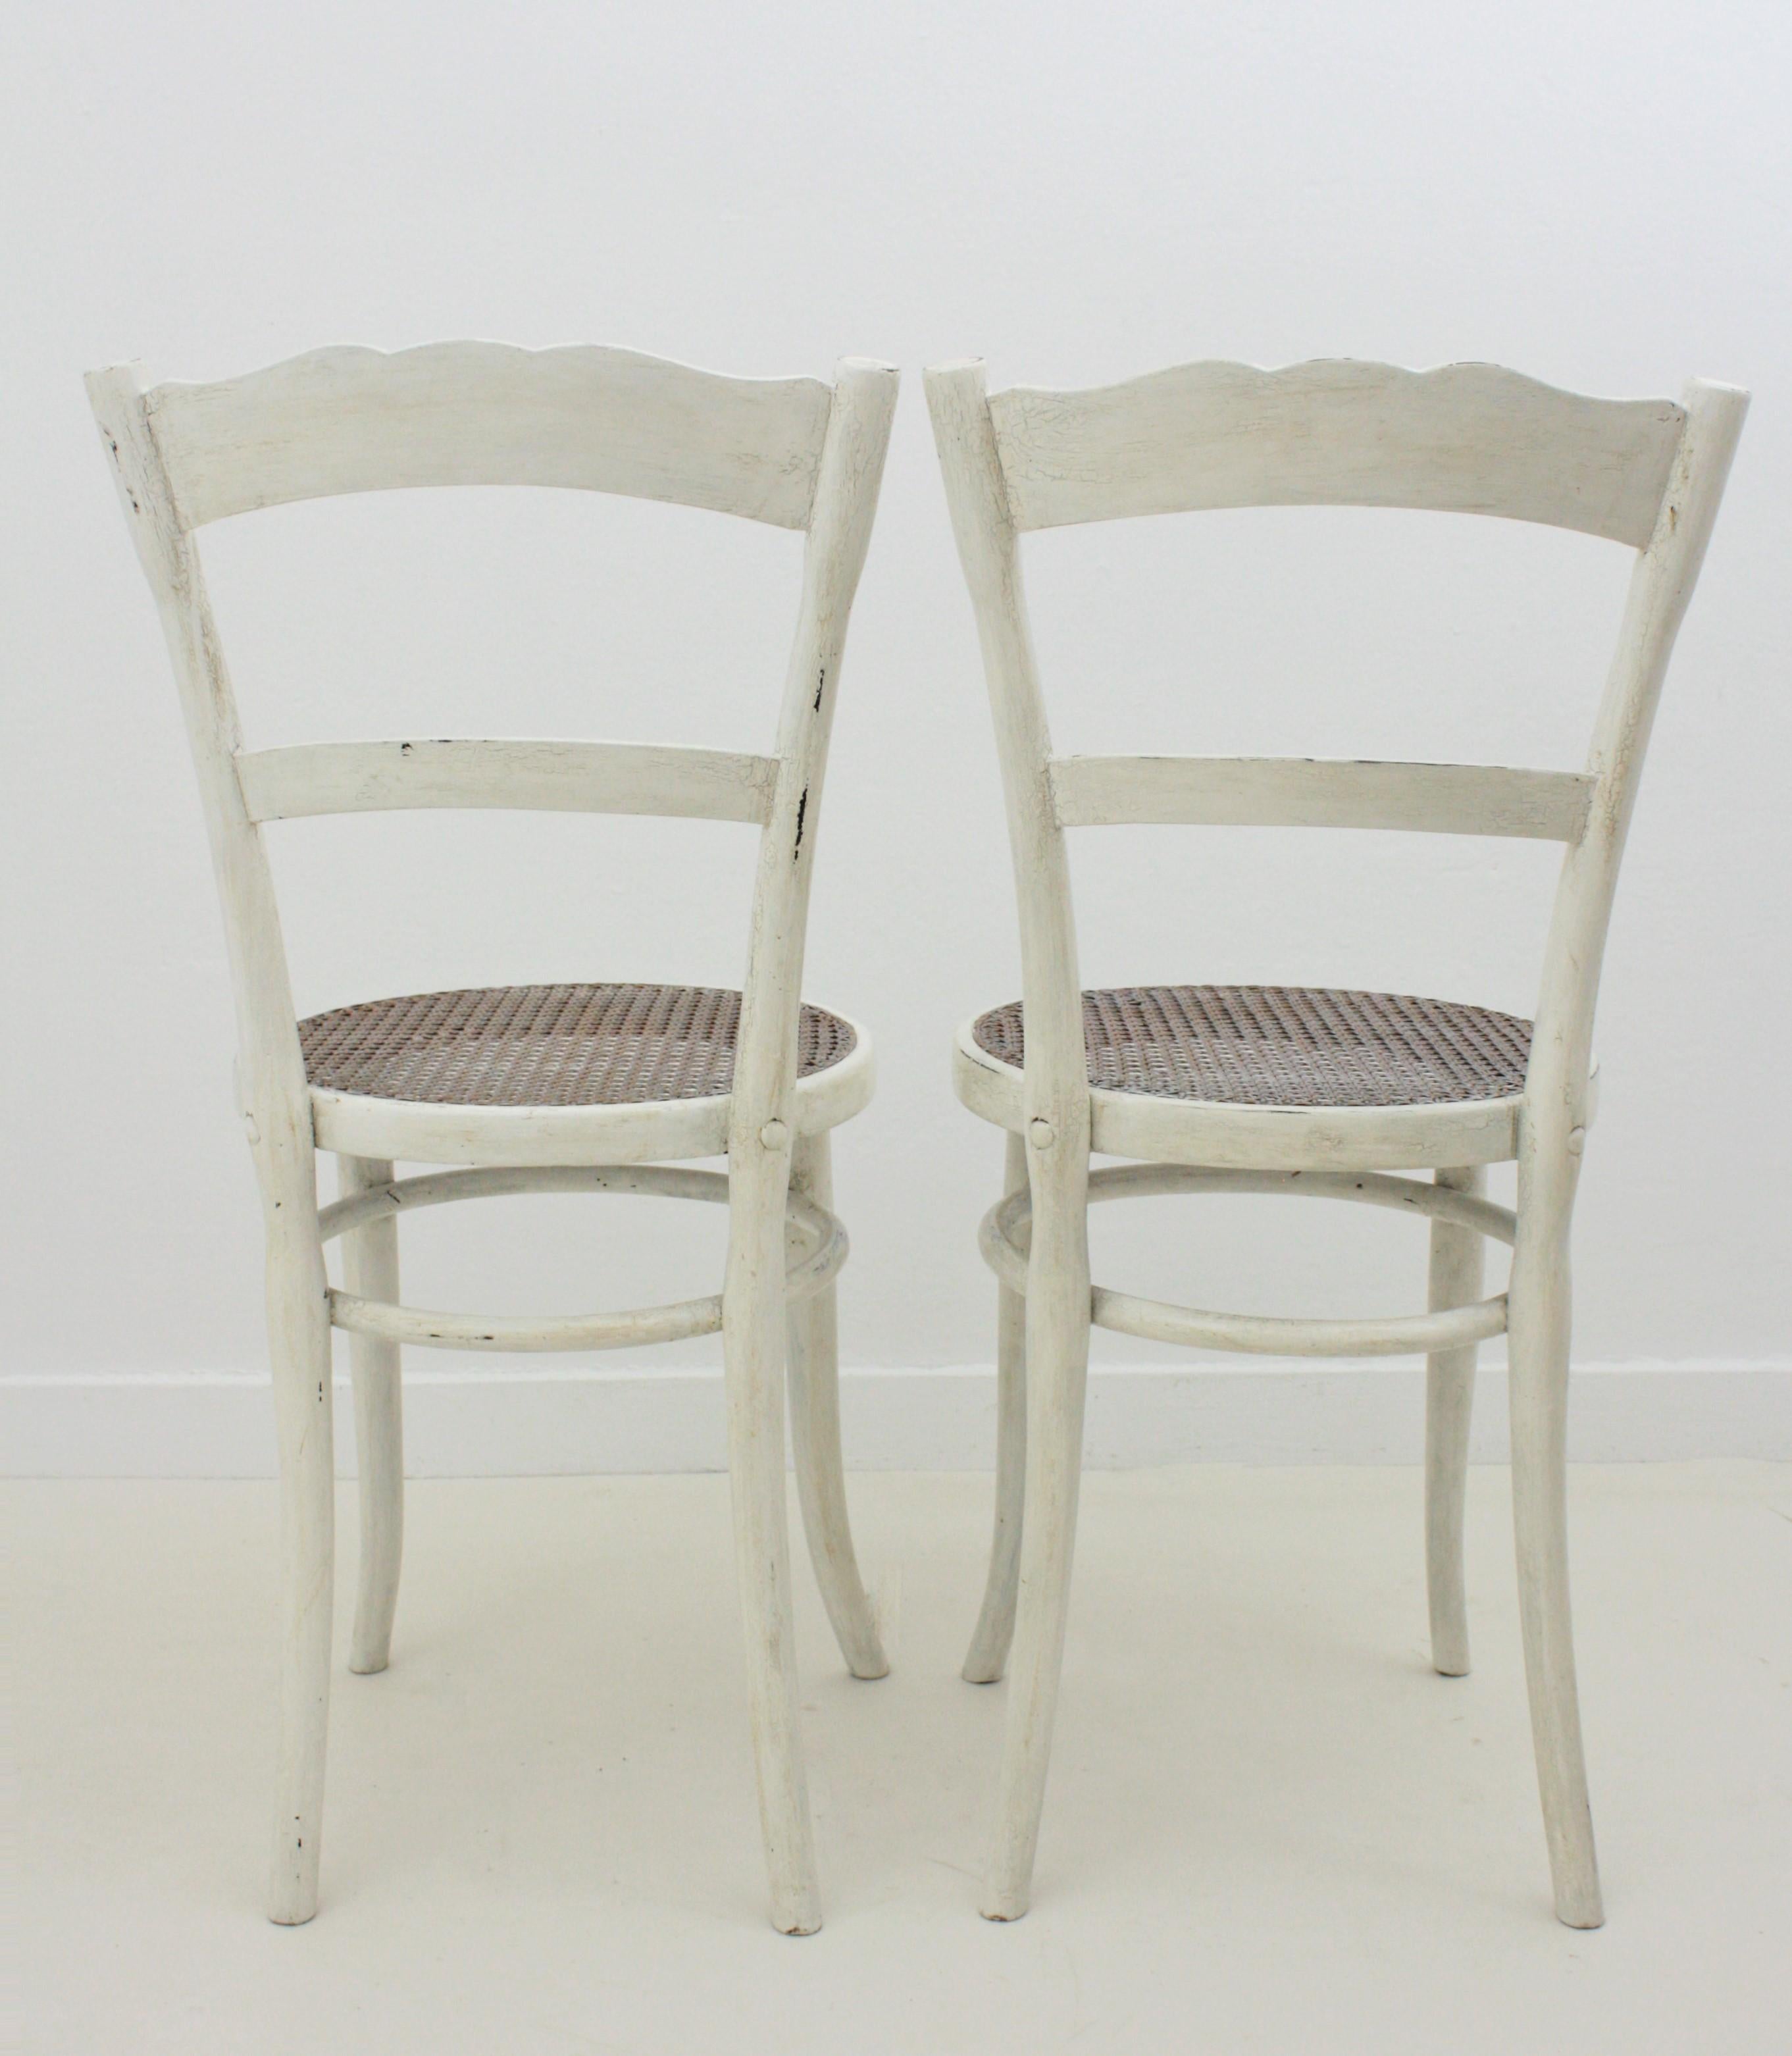 20th Century Jacob & Josef Kohn Vienna Secession Patinated Chairs with Wicker Seats, Pair For Sale